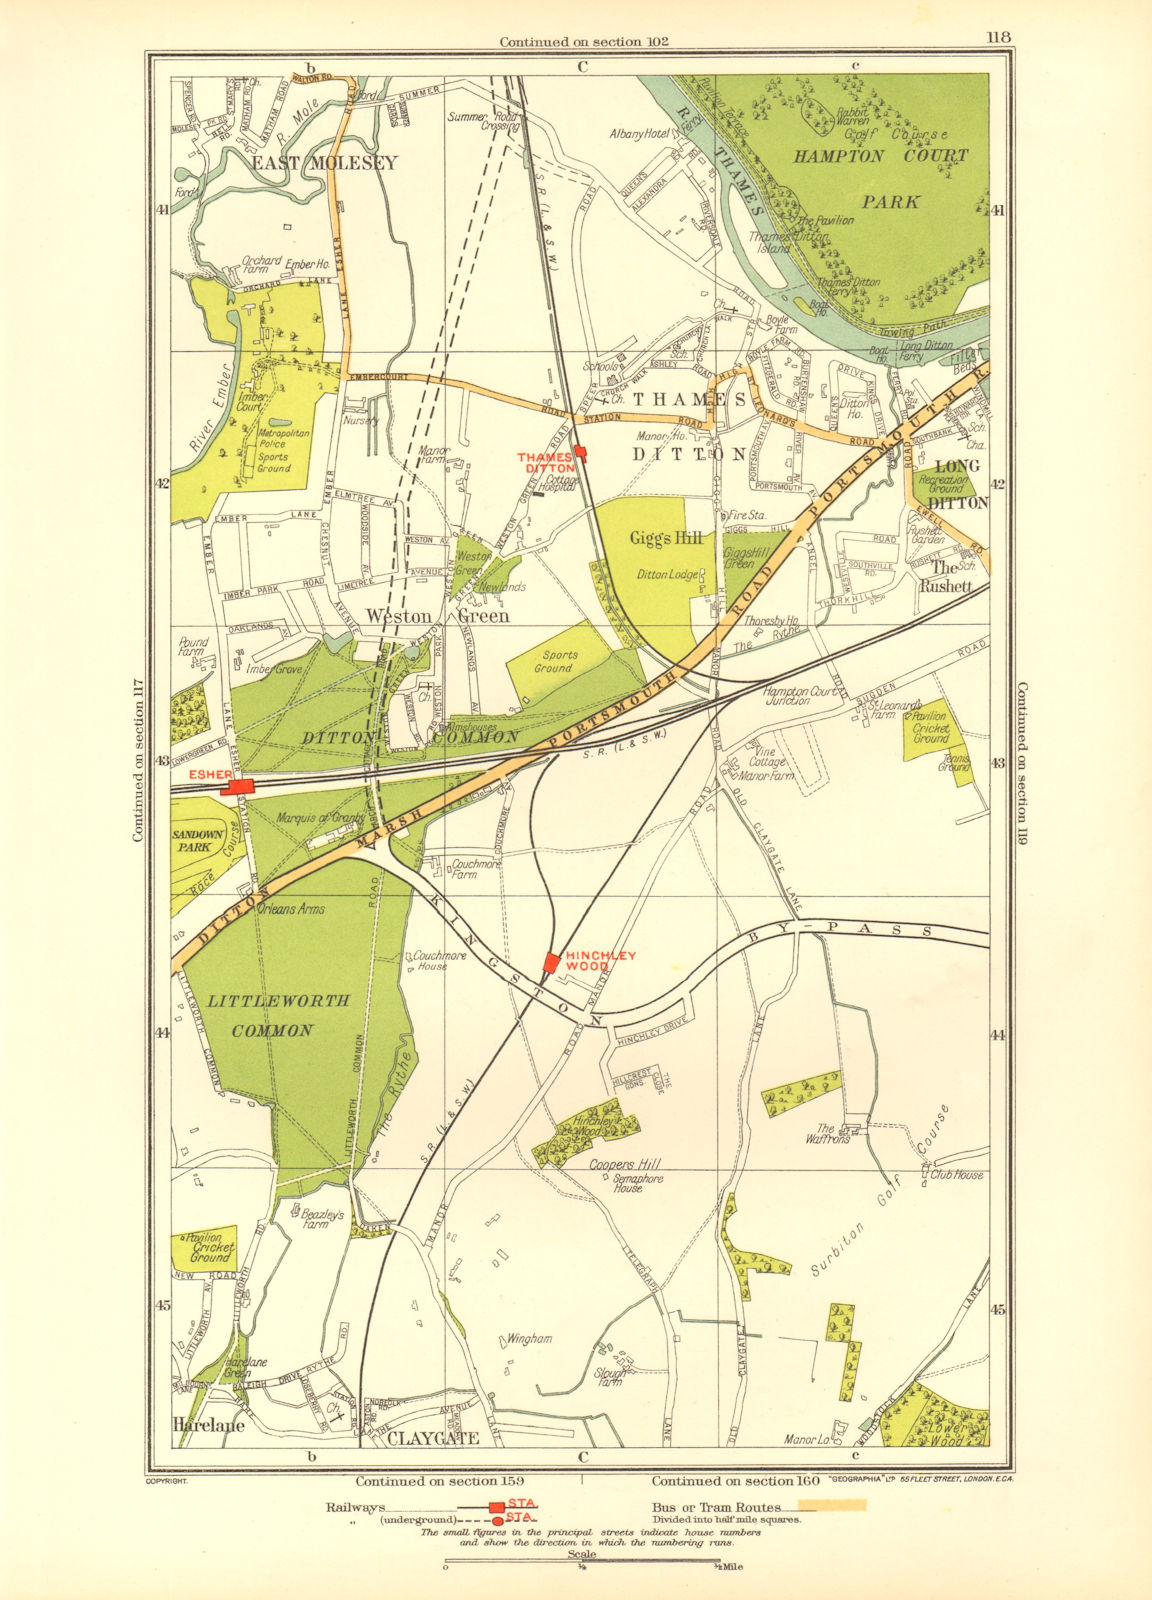 THAMES DITTON / LONG DITTON. Esher East Molesey Claygate Harelane 1933 old map